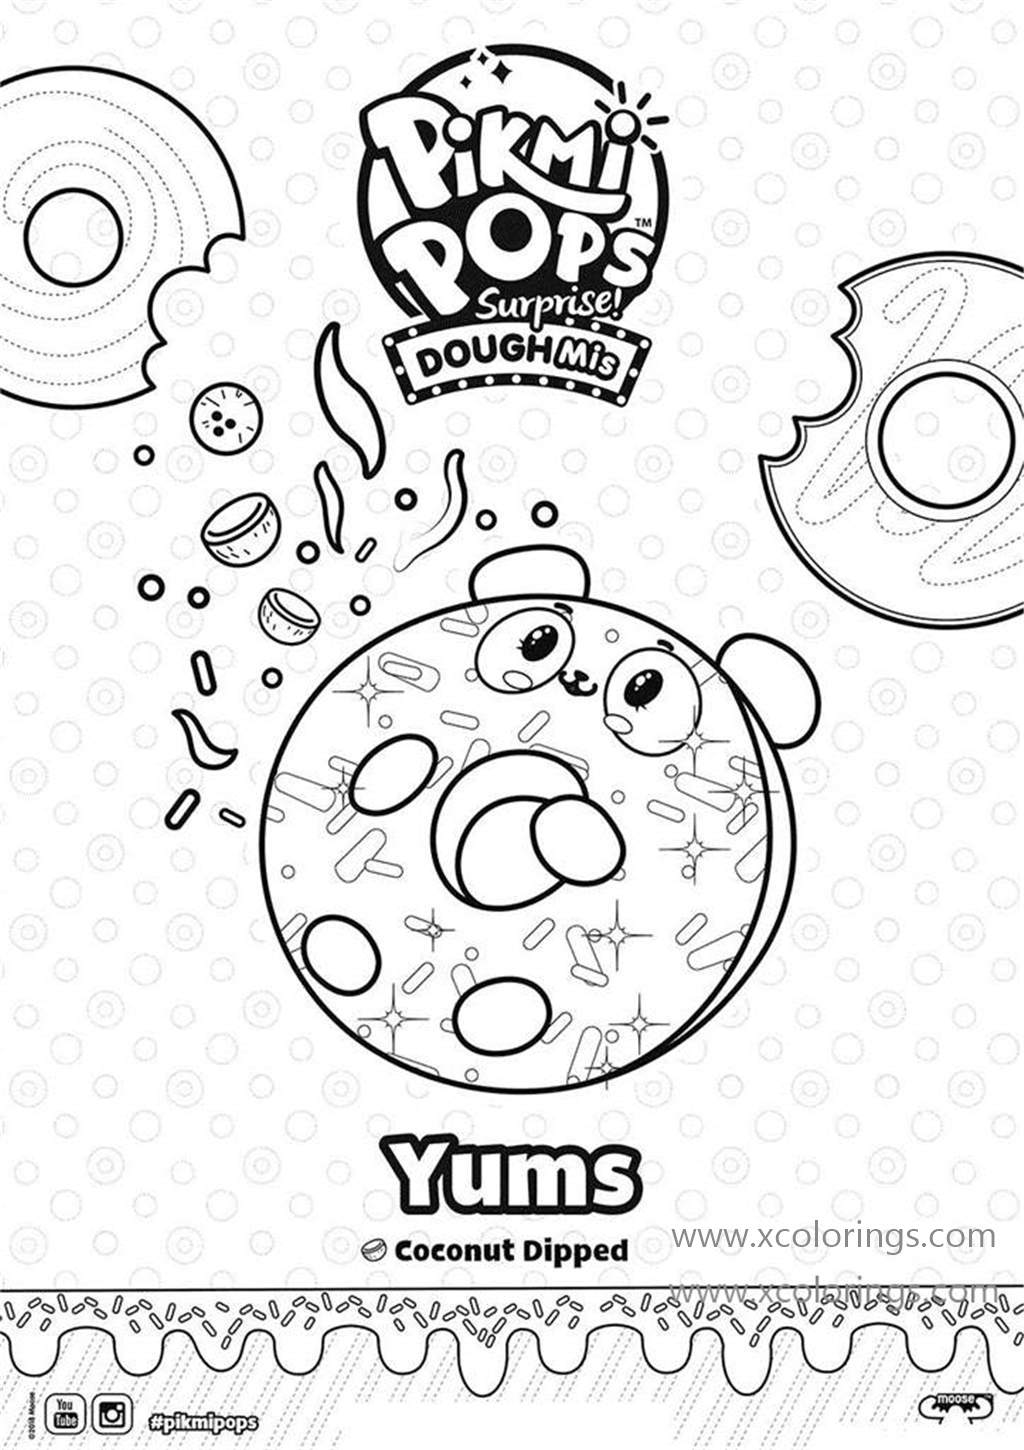 Free Pikmi Pops Coloring Pages Yums printable